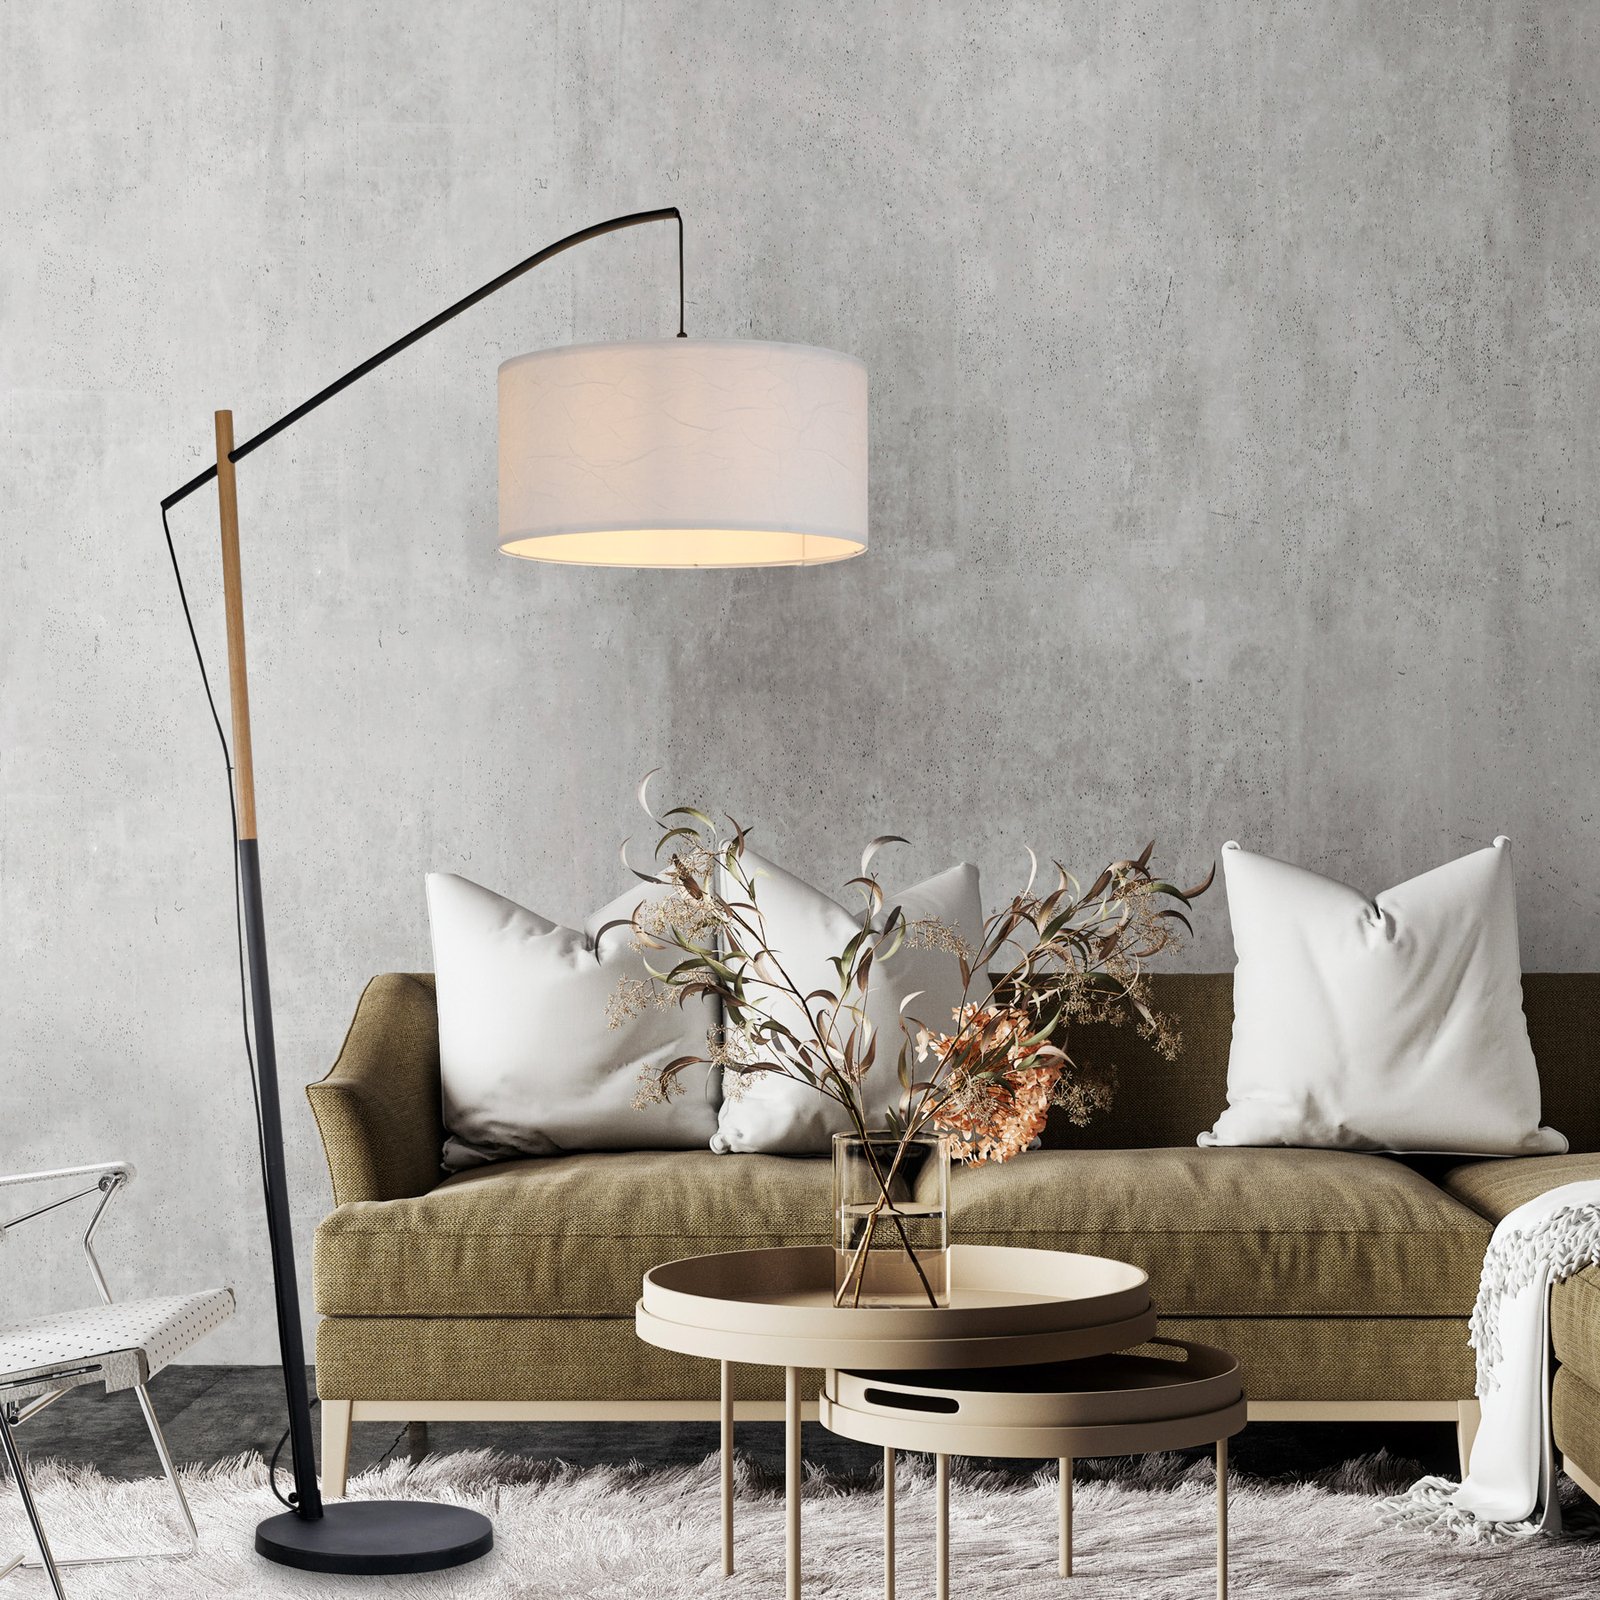 Green Sofie floor lamp with paper shade